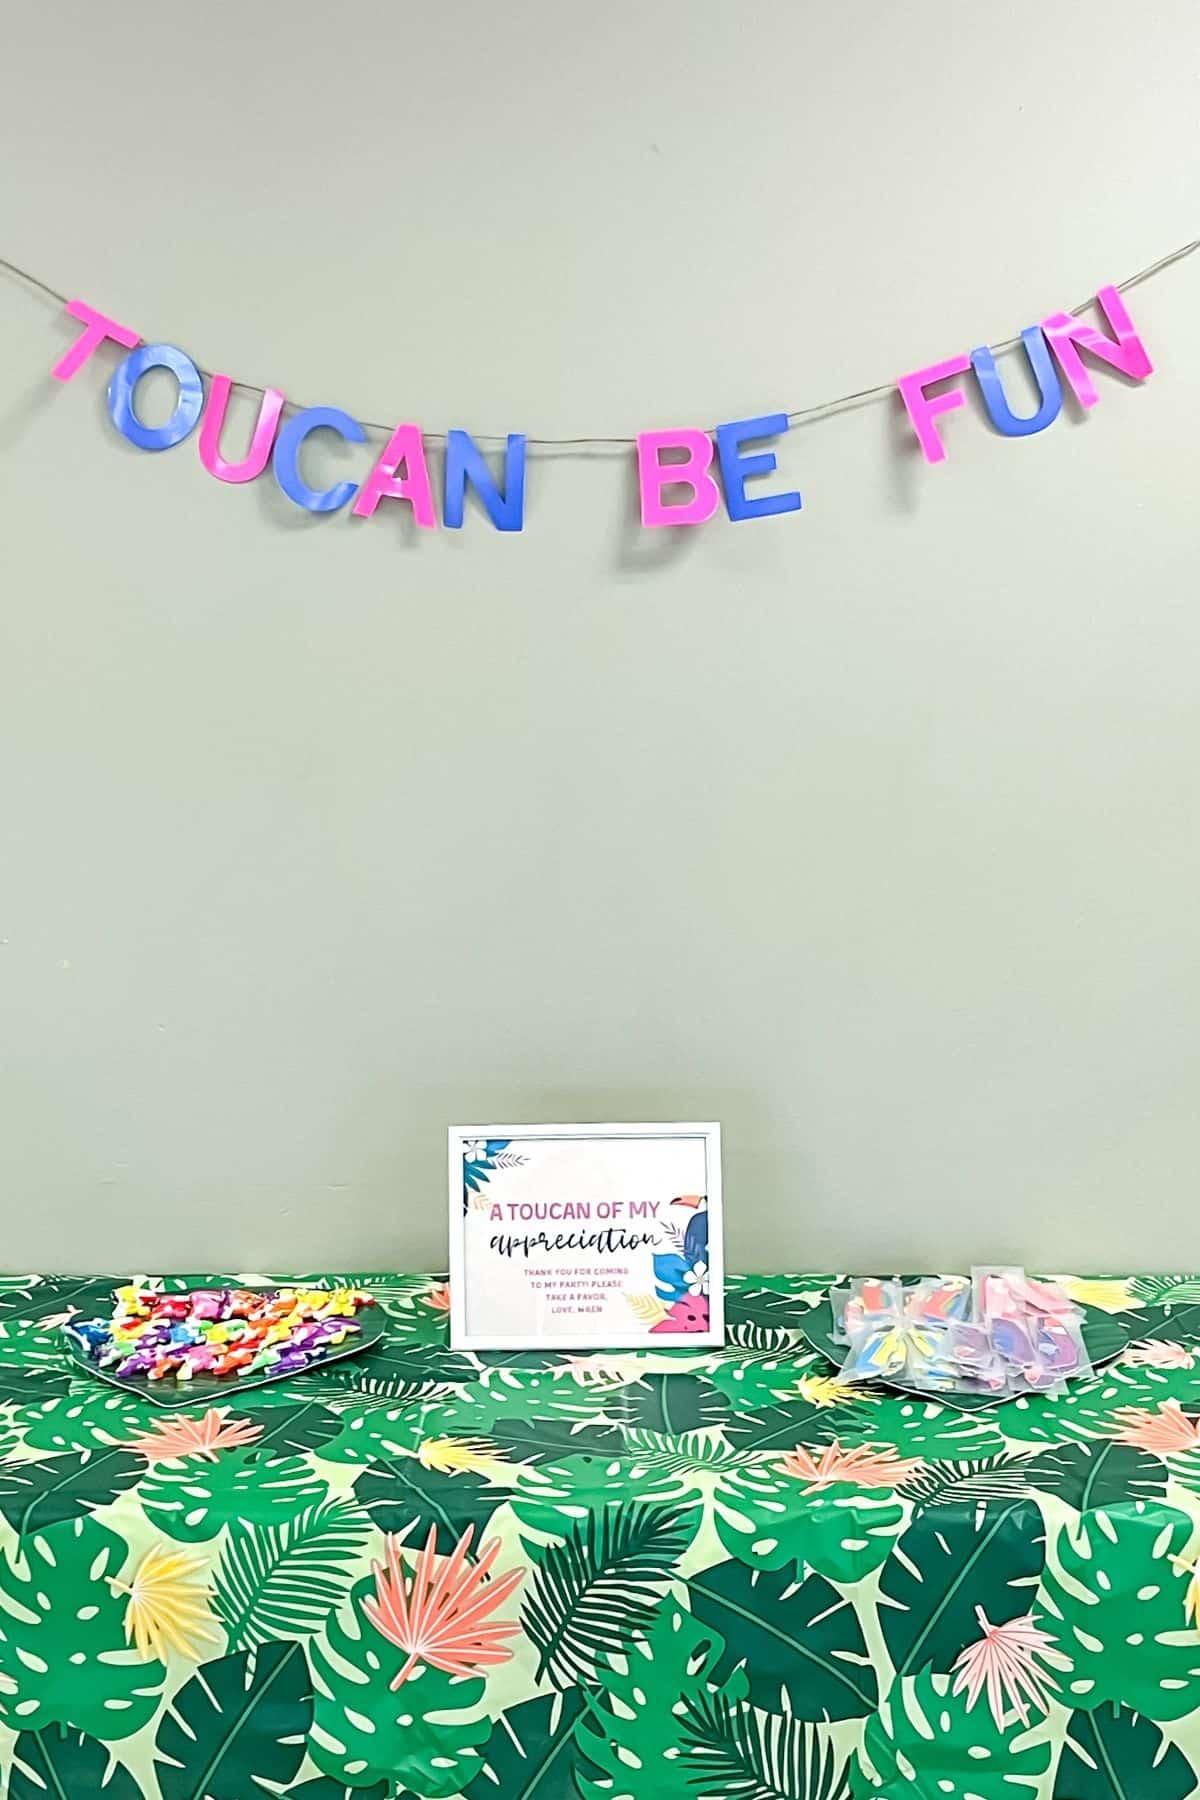 A party favor table with a banner that says toucan be fun.